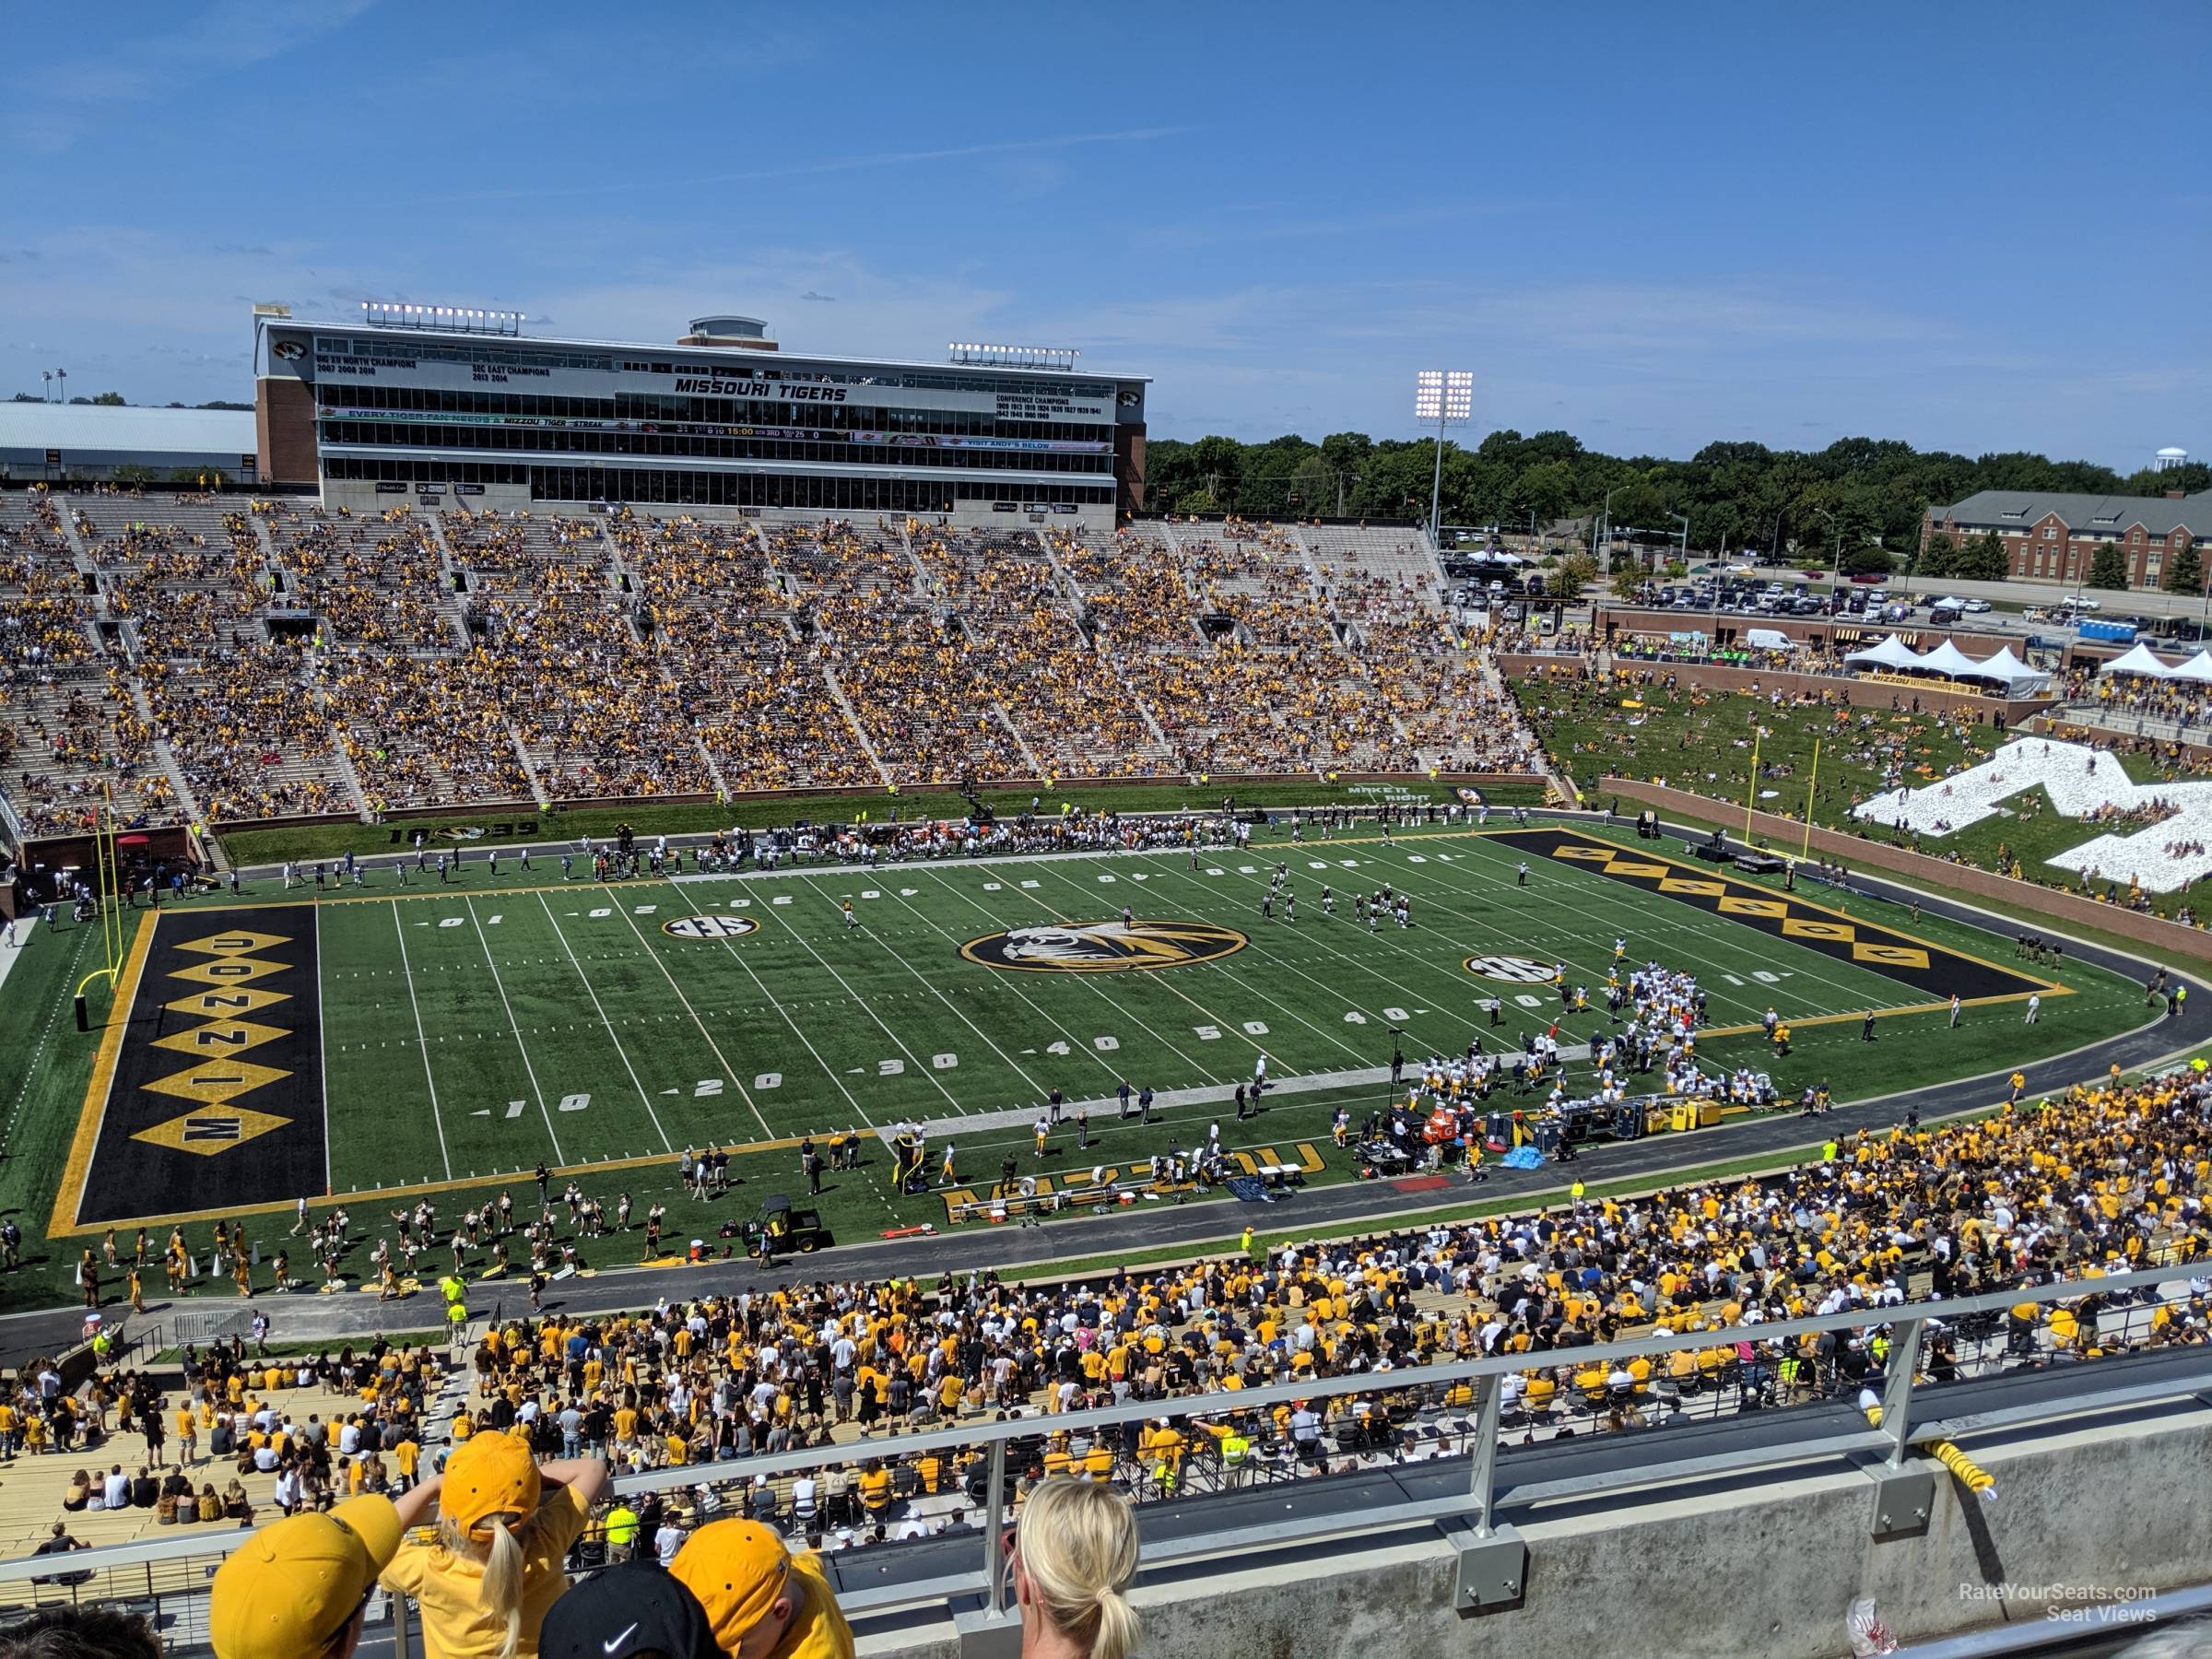 section 304, row 4 seat view  - faurot field